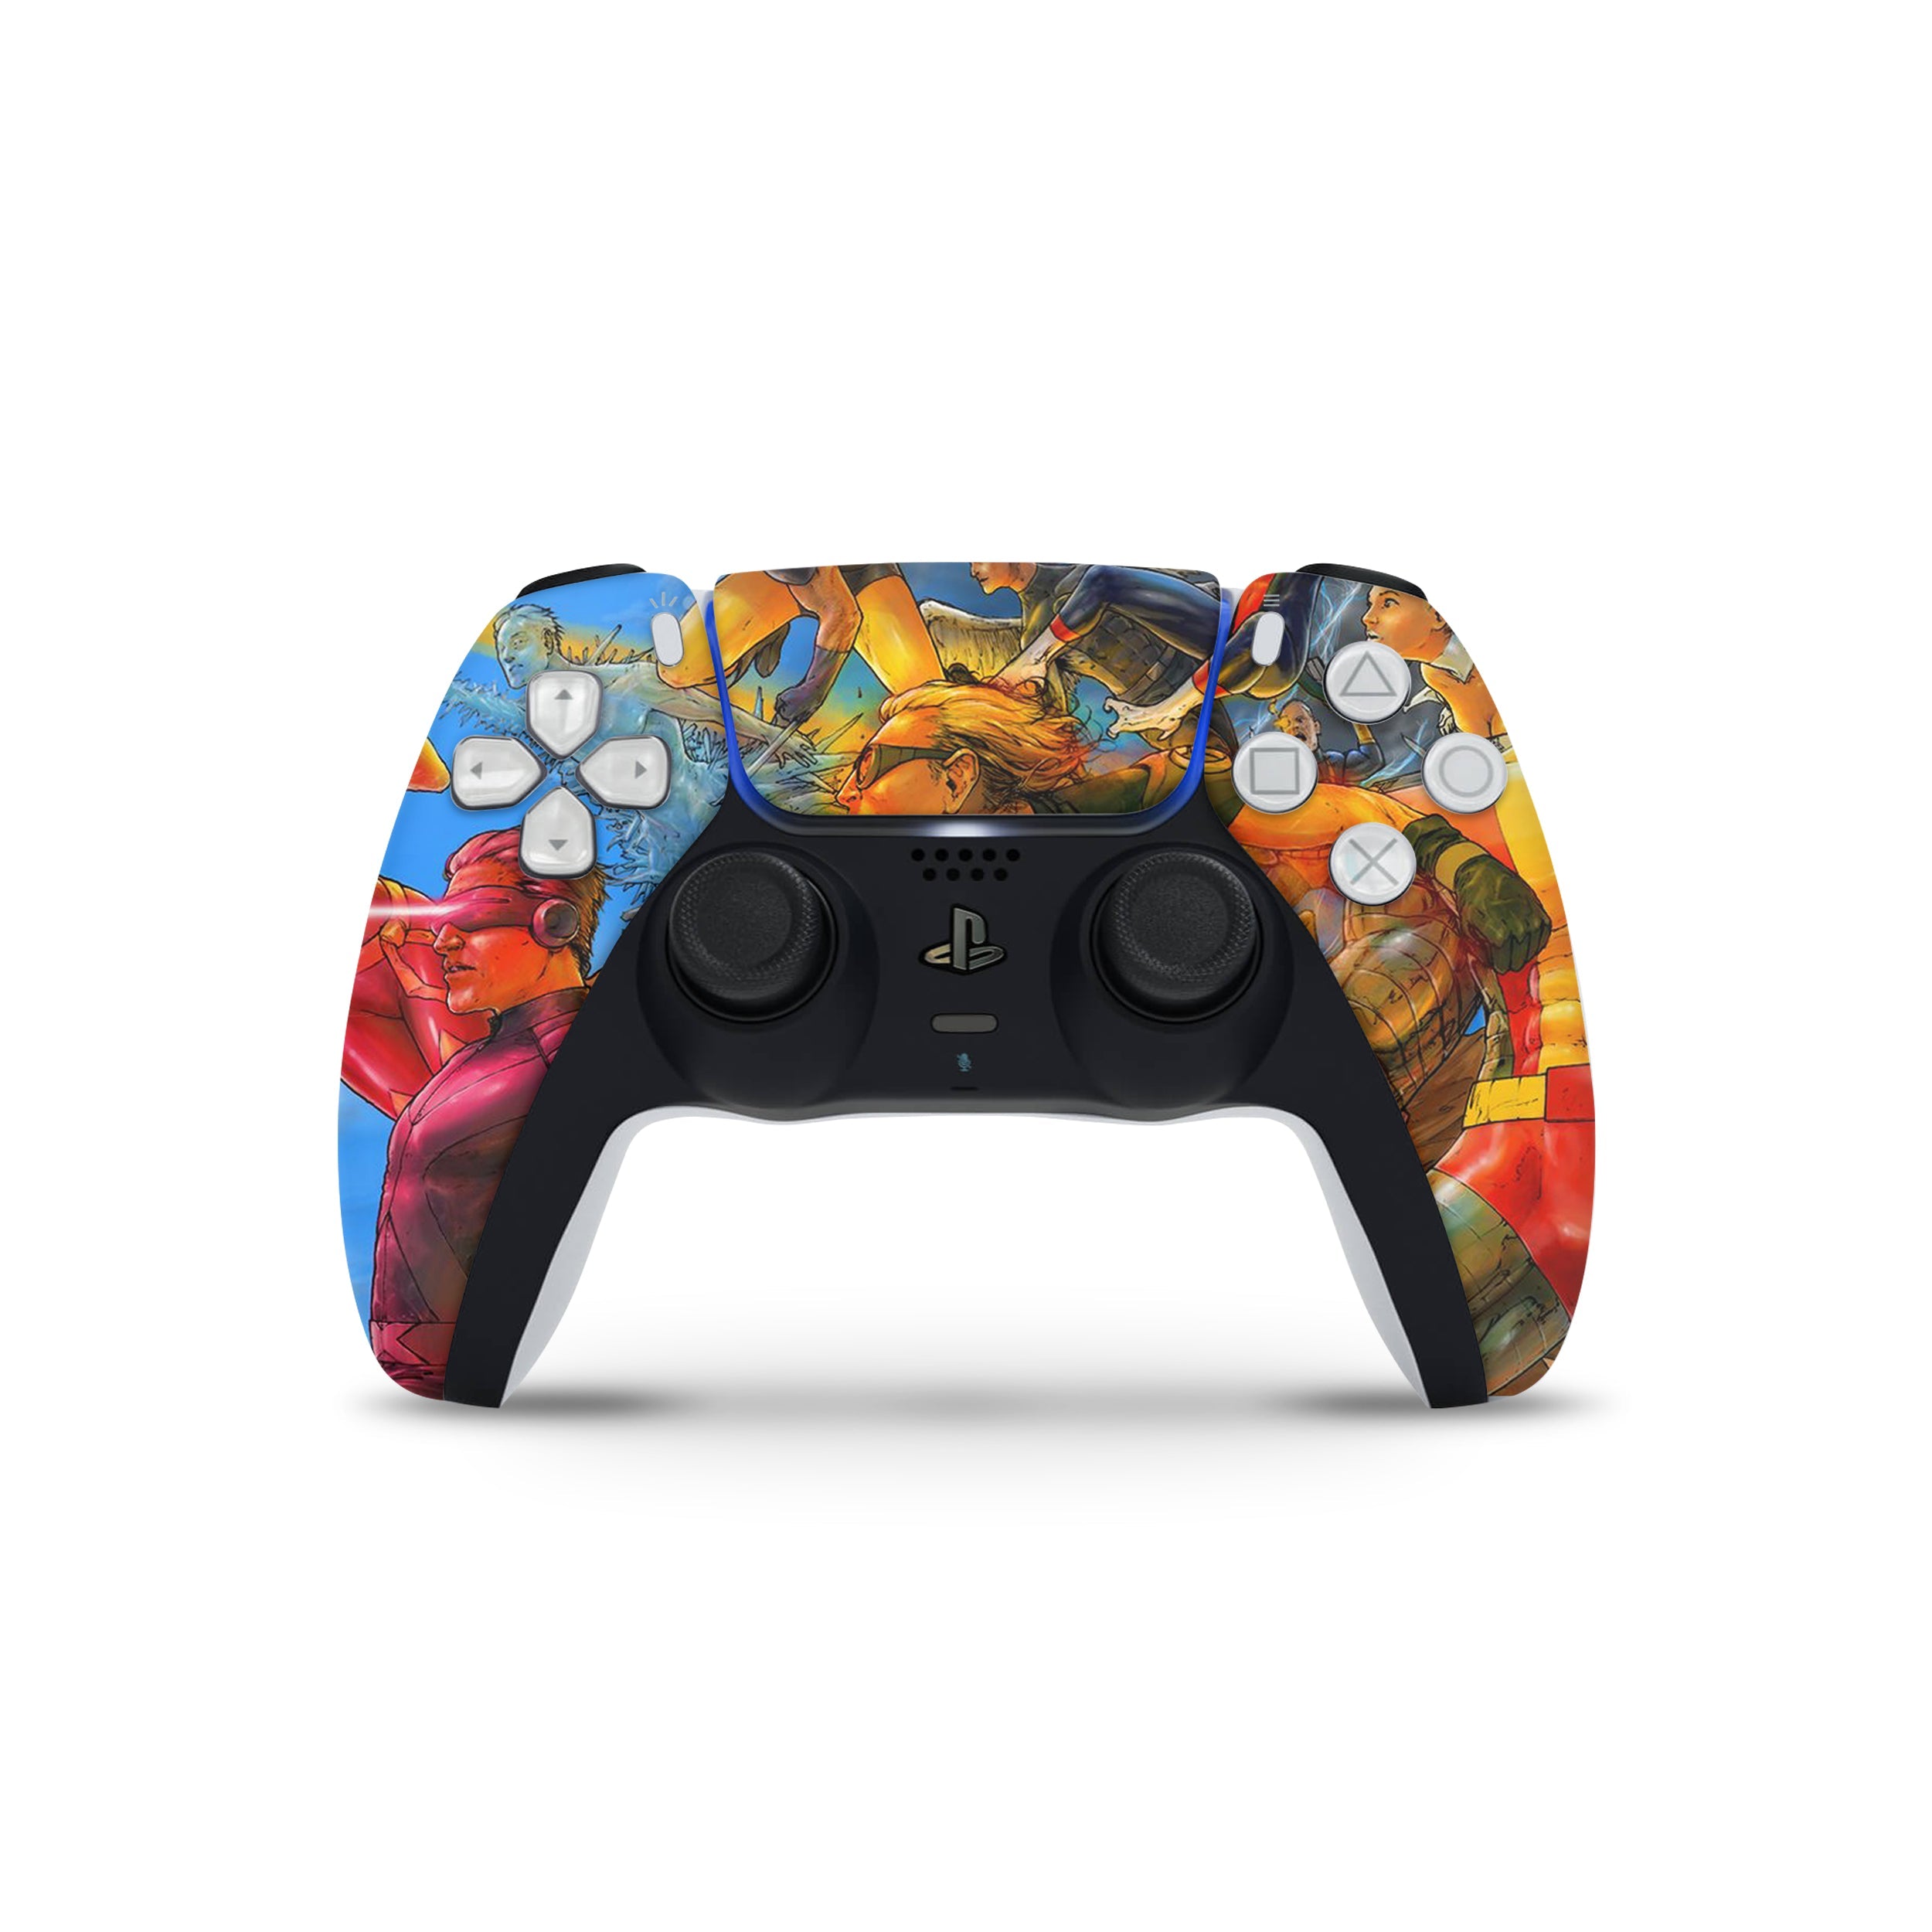 A video game skin featuring a Marvel X Men design for the PS5 DualSense Controller.